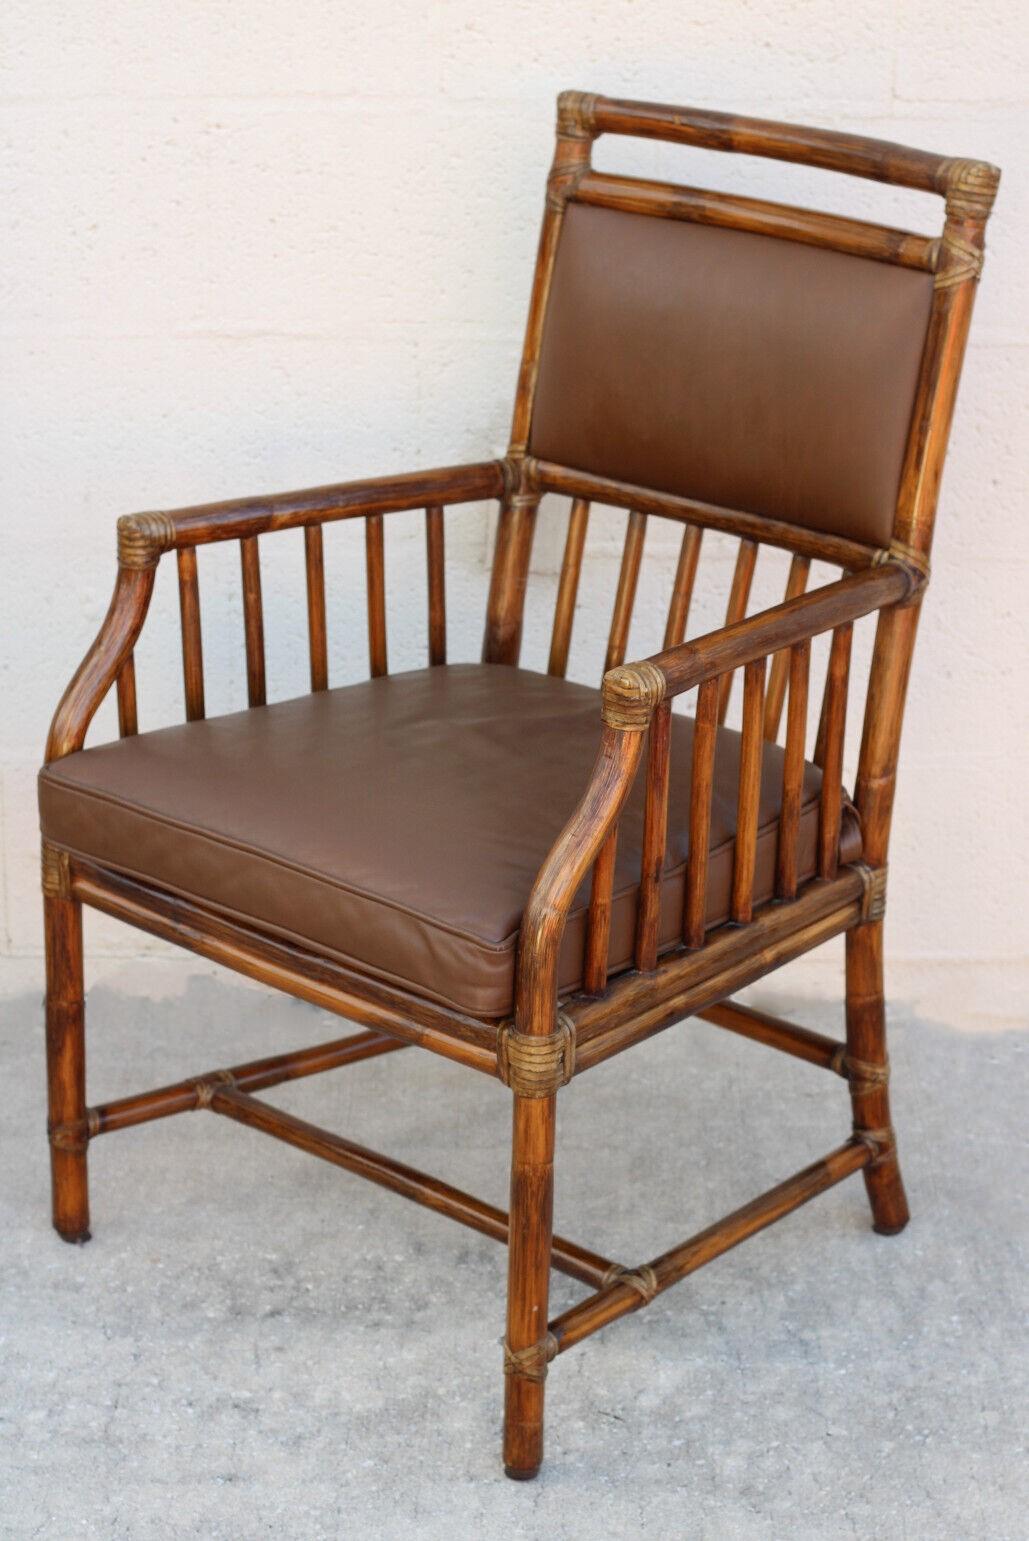 A pair of vintage McGuire rattan and leather arm chairs or dining chairs, featuring Craftsman details. The chairs were designed by Andrew Delfino and have a rich dark tobacco finish along with supple leather seat backs and leather cushions placed